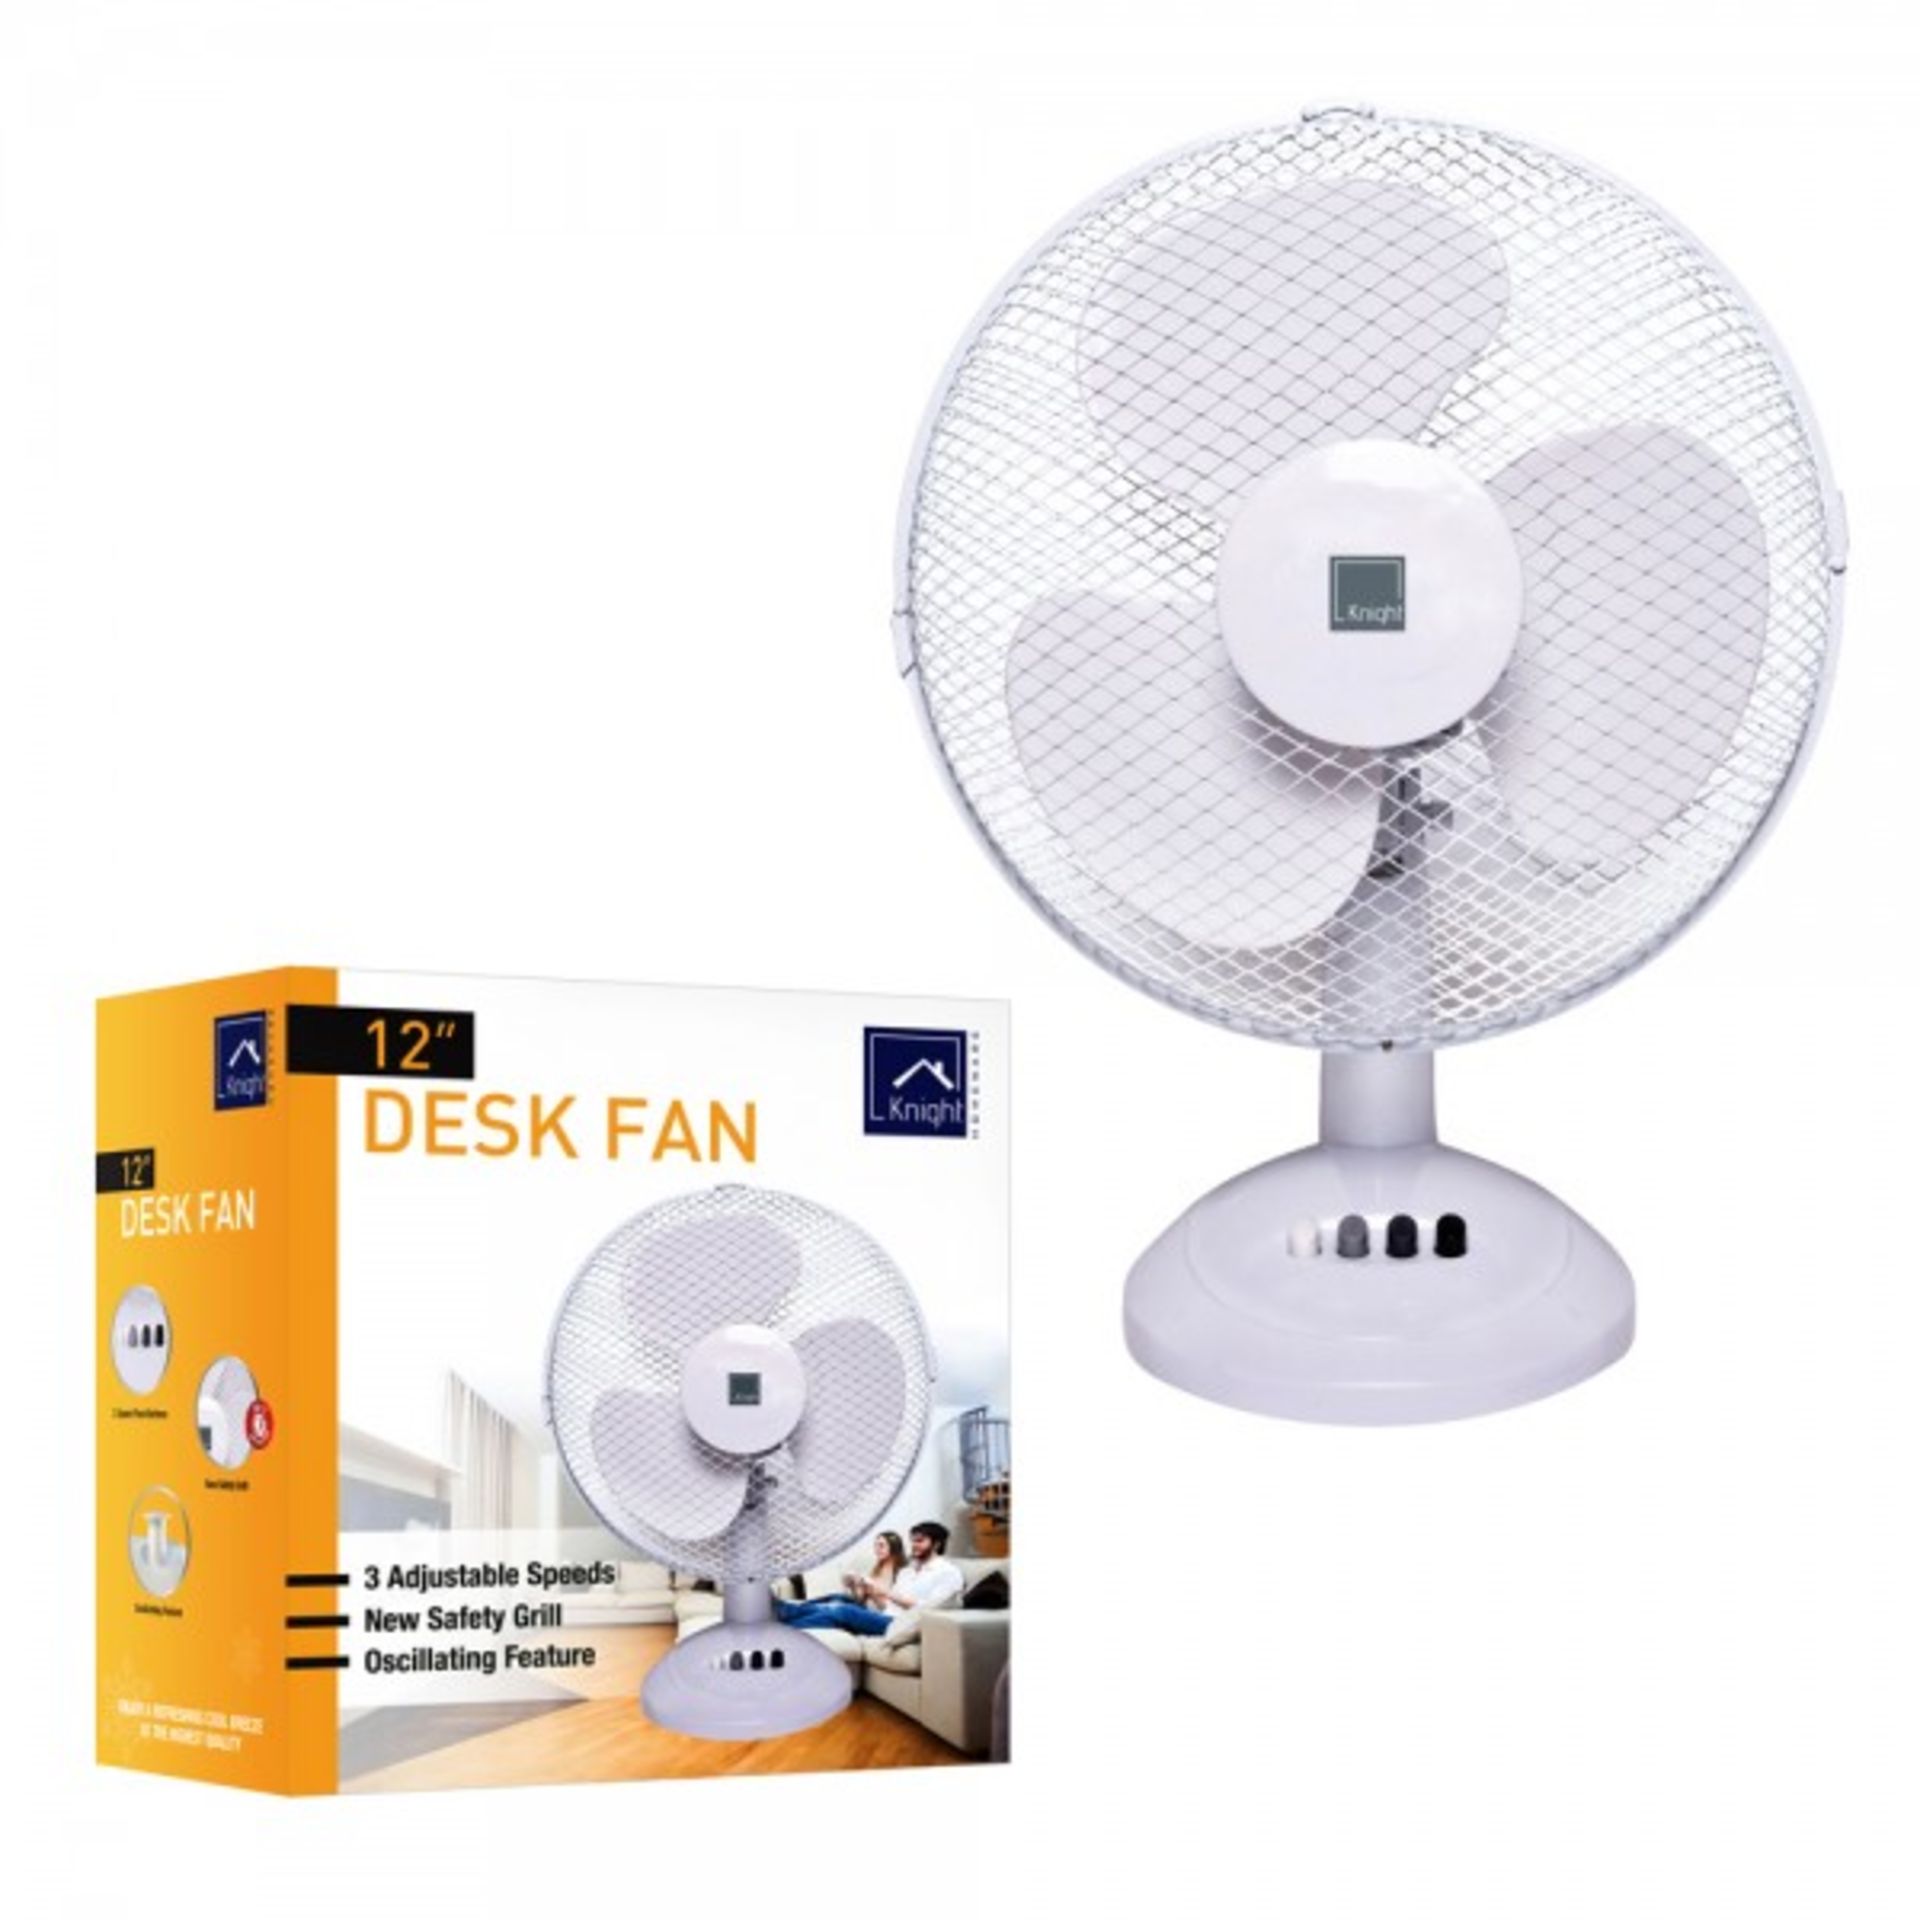 V Brand New 12" Desk Top Oscillating Three Speed Fan X 2 Bid price to be multiplied by Two